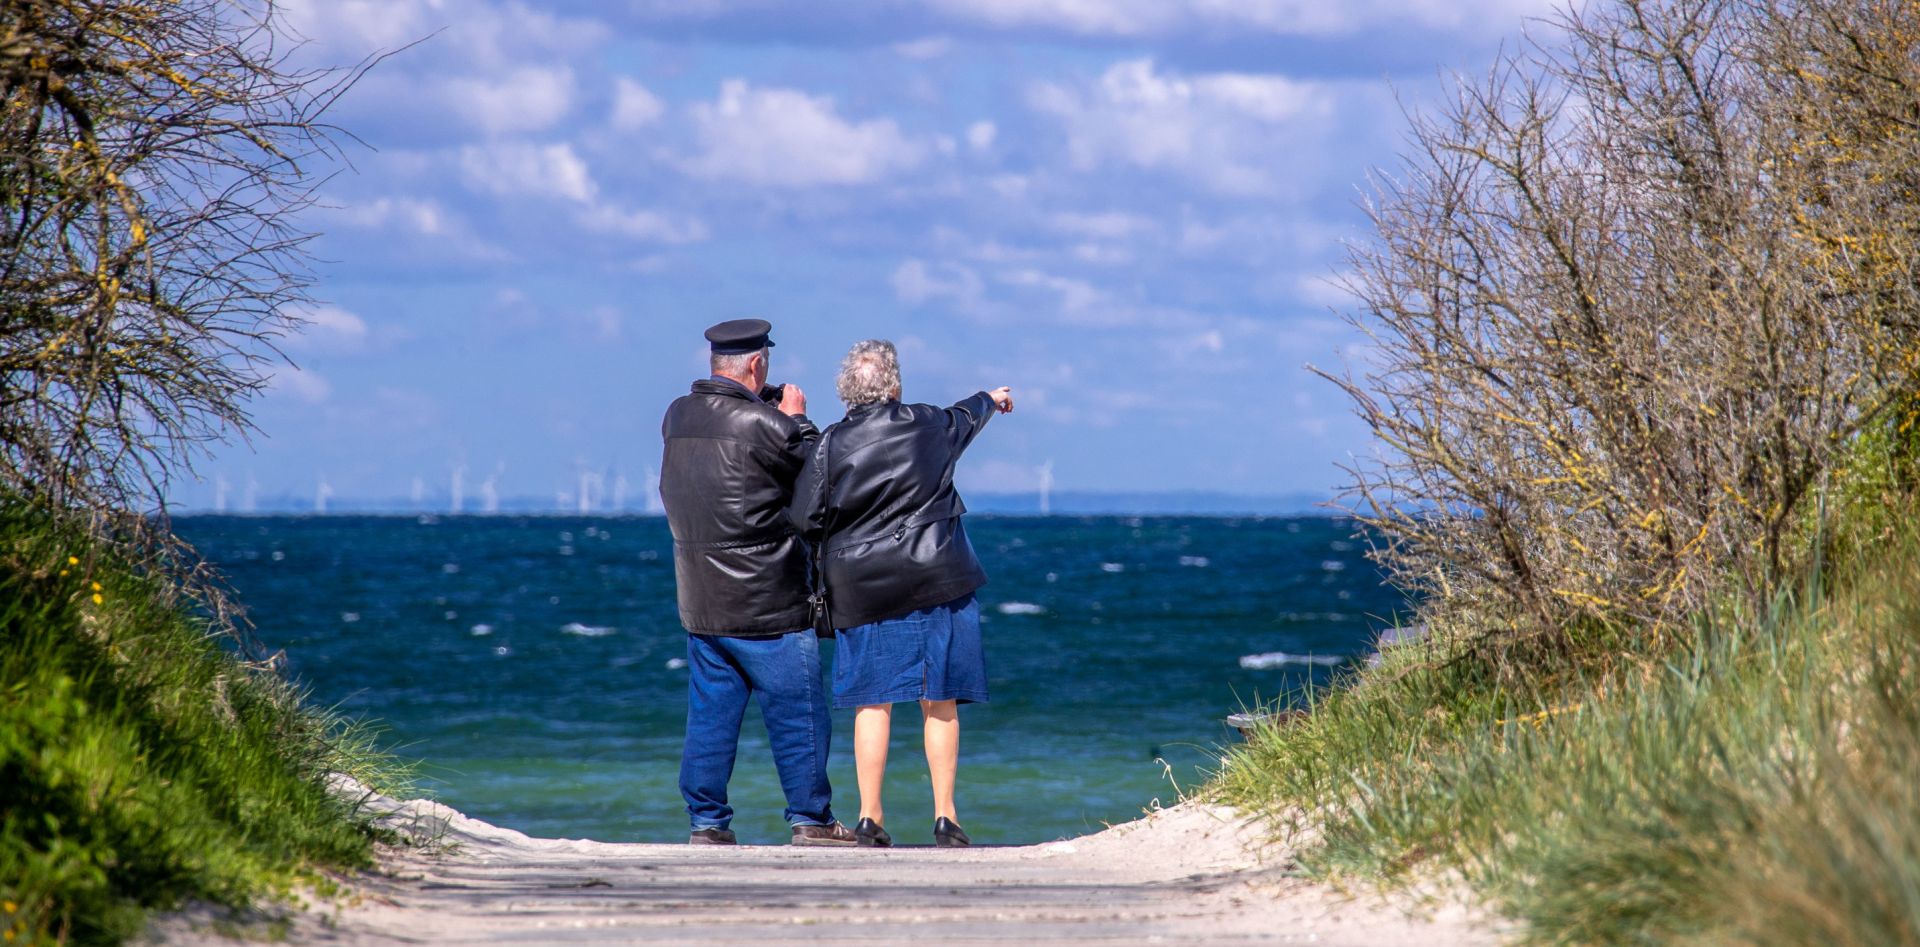 dpatop - 05 May 2020, Mecklenburg-West Pomerania, Timmendorf: A couple stands on a deserted beach, as the Mecklenburg-Vorpommern state opens its restaurants again and ends the several weeks' ban on foreign tourists before Whitsun. Photo: Jens Büttner/dpa-Zentralbild/dpa